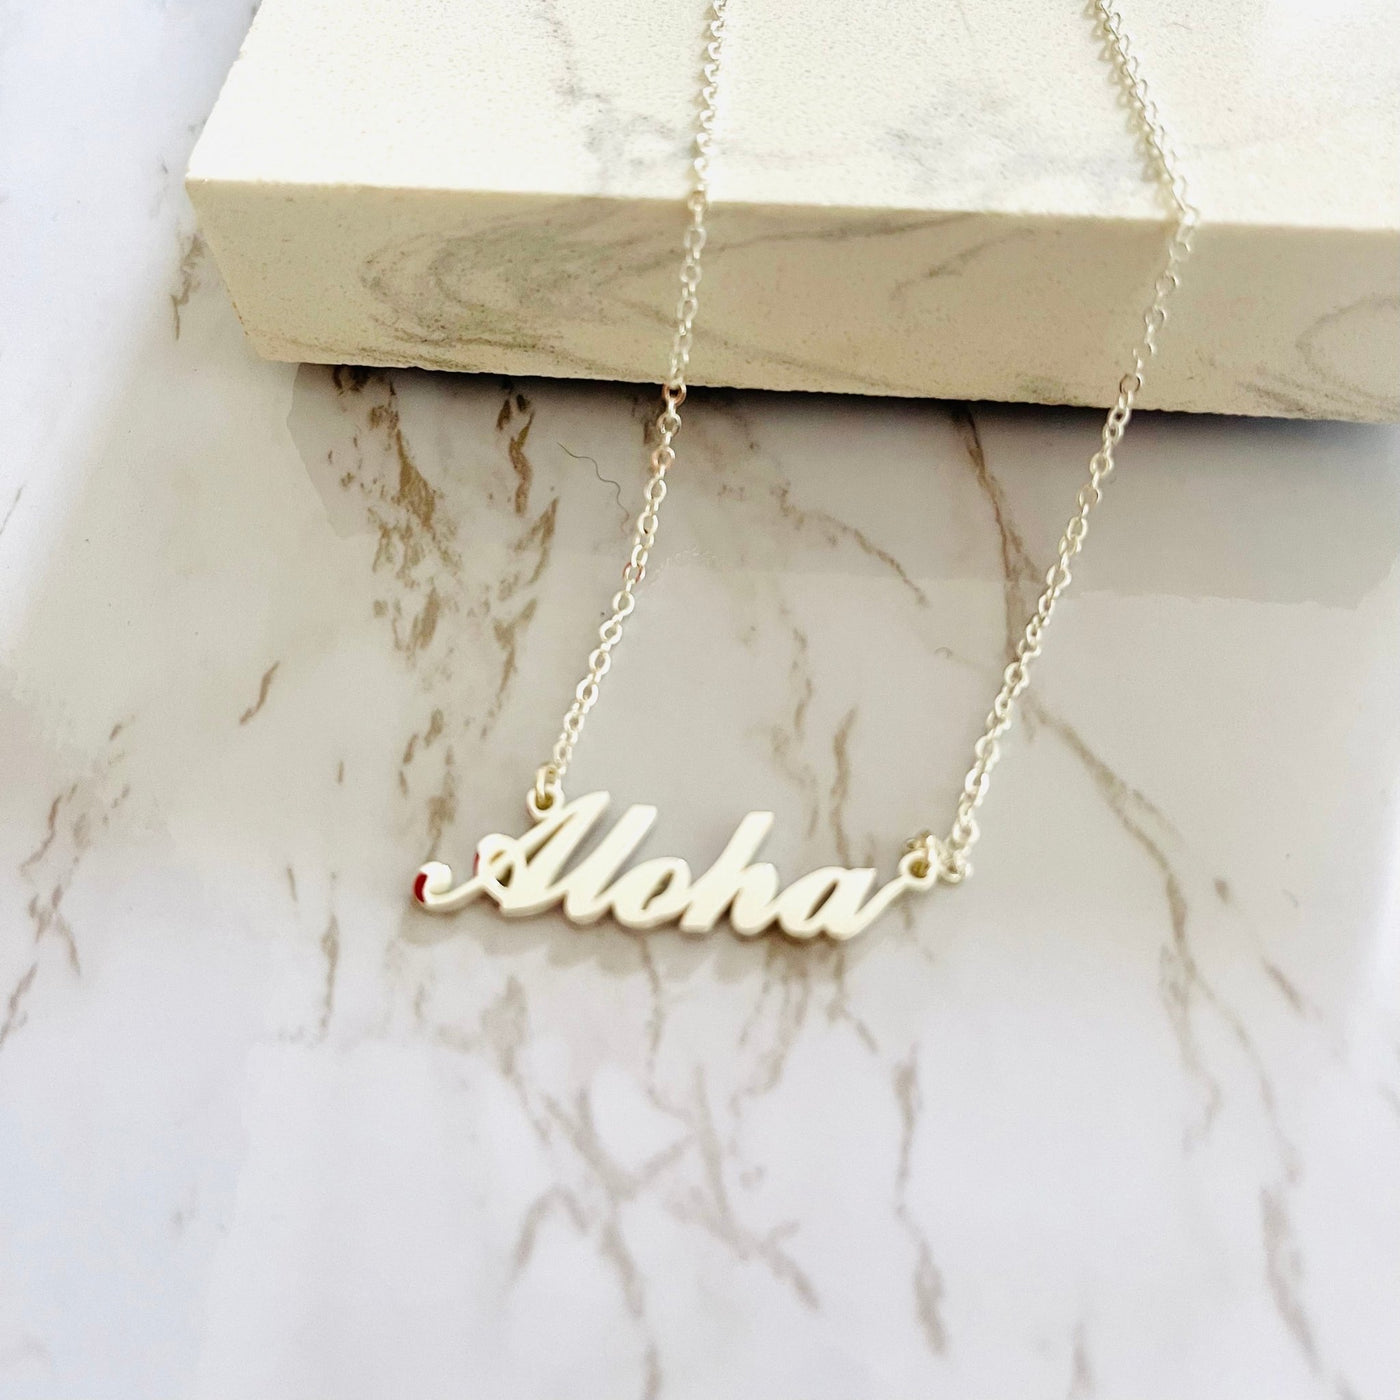 Personalized Name Necklace - "The Carrie" - Capsul